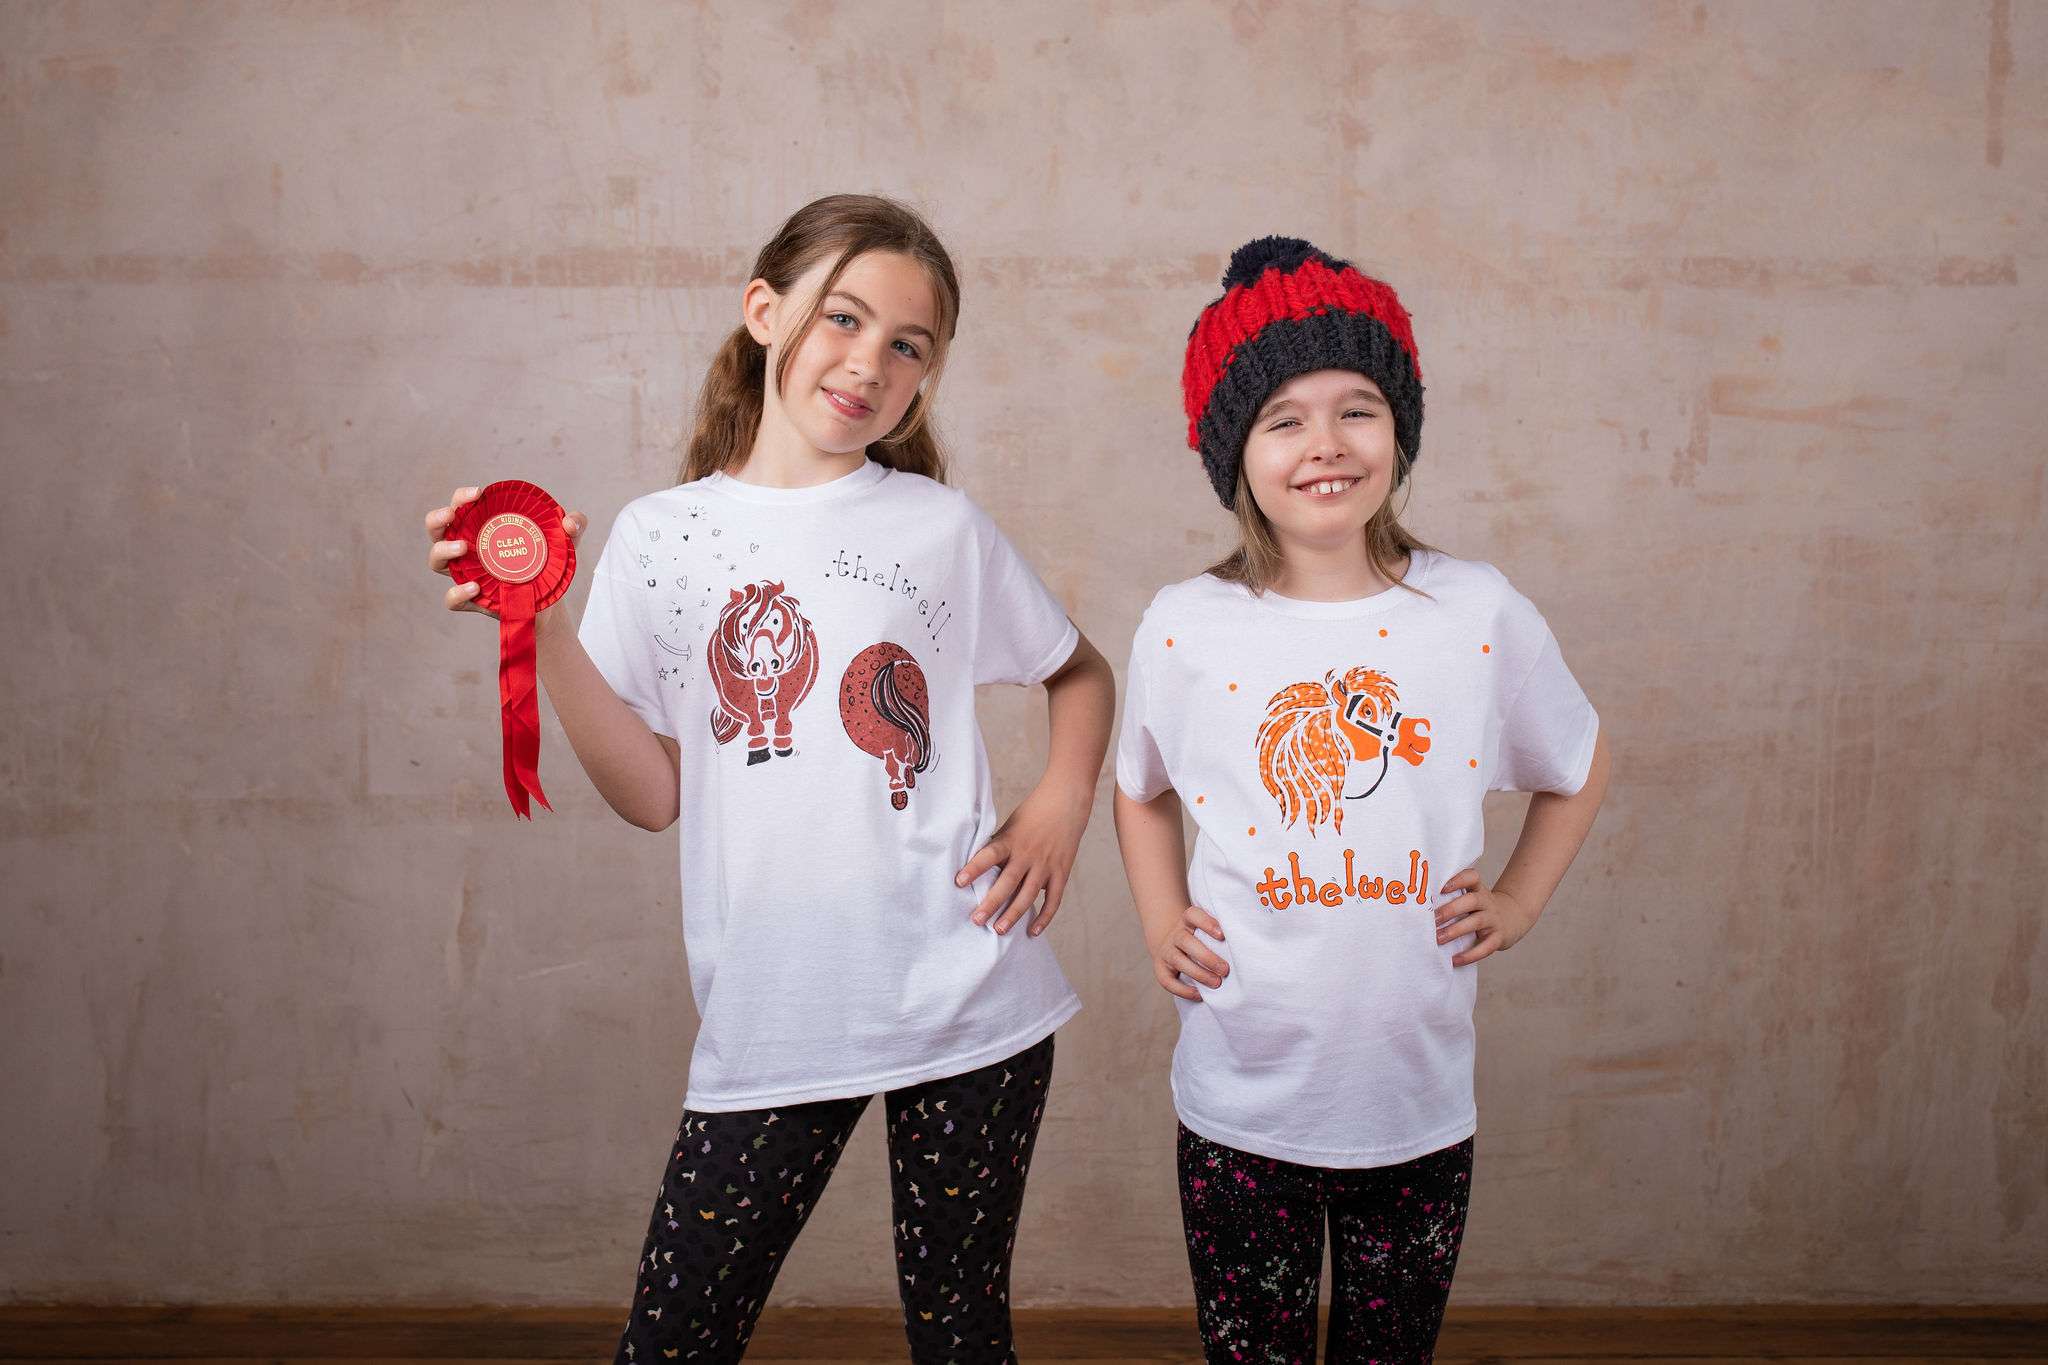 Thelwell Pony T-Shirt Painting Craft Kit Launched as Leading Craft Company Form New Partnership